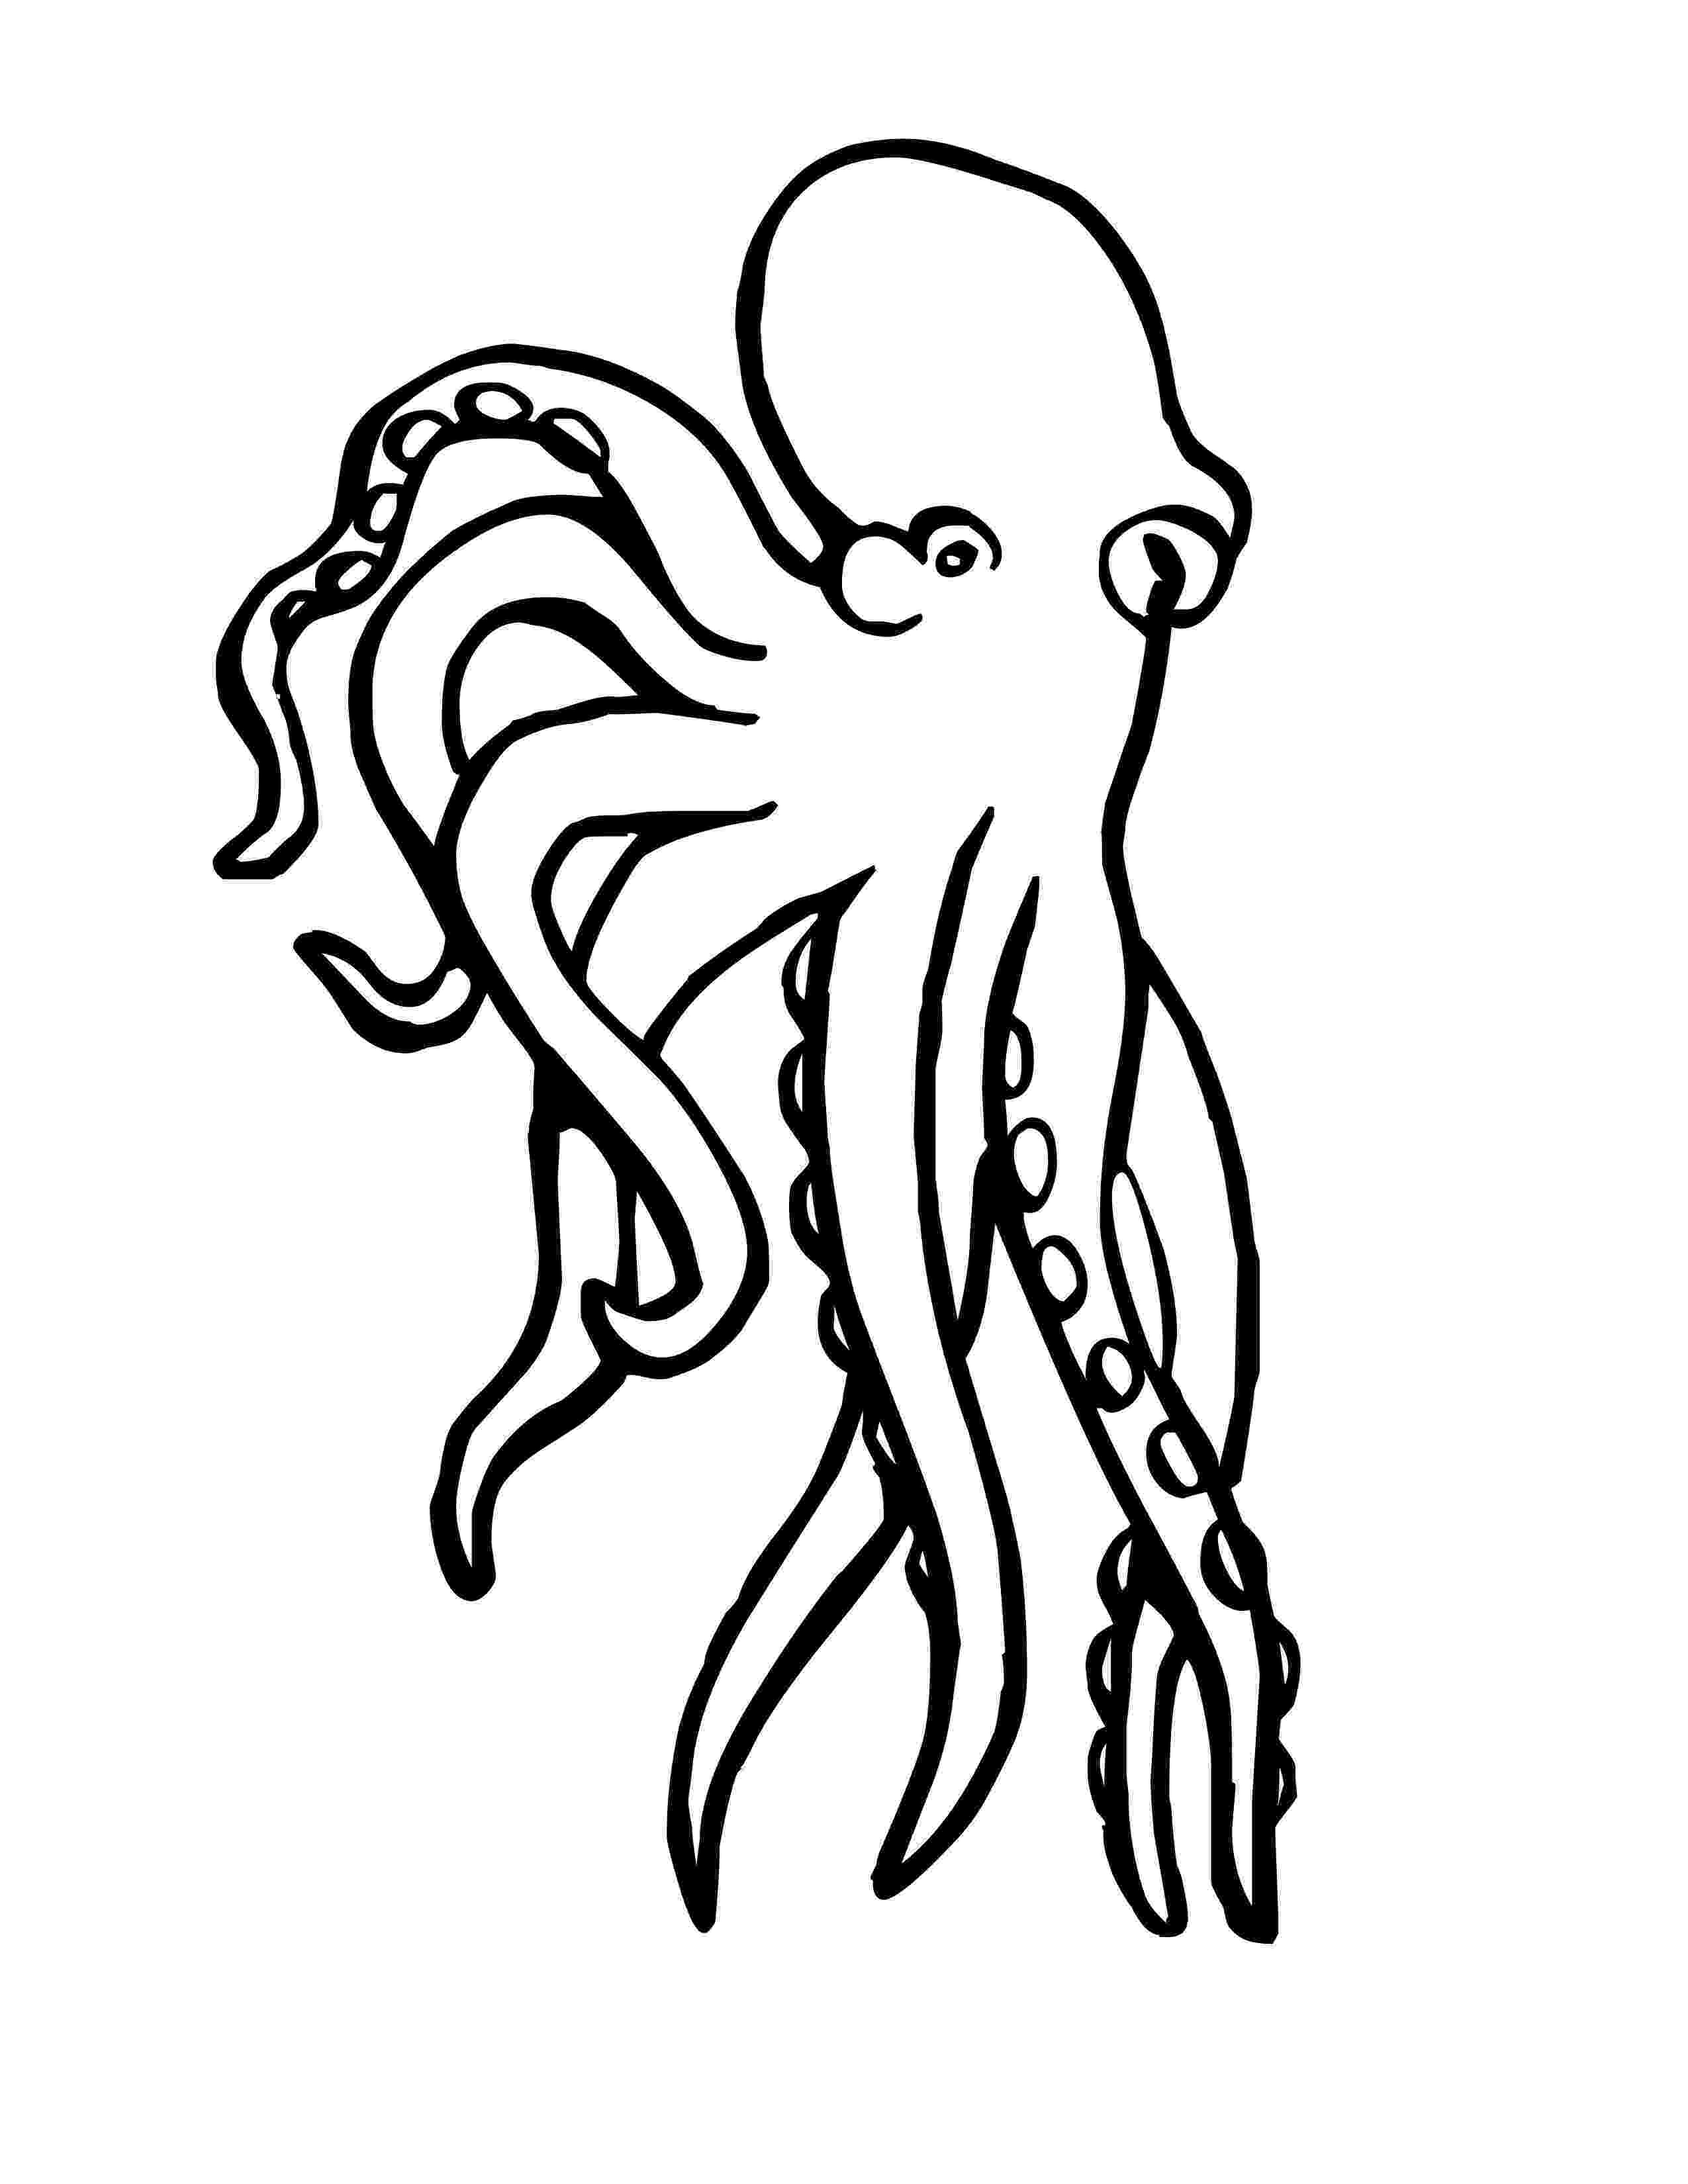 squid coloring page squid coloring pages to download and print for free squid page coloring 1 1